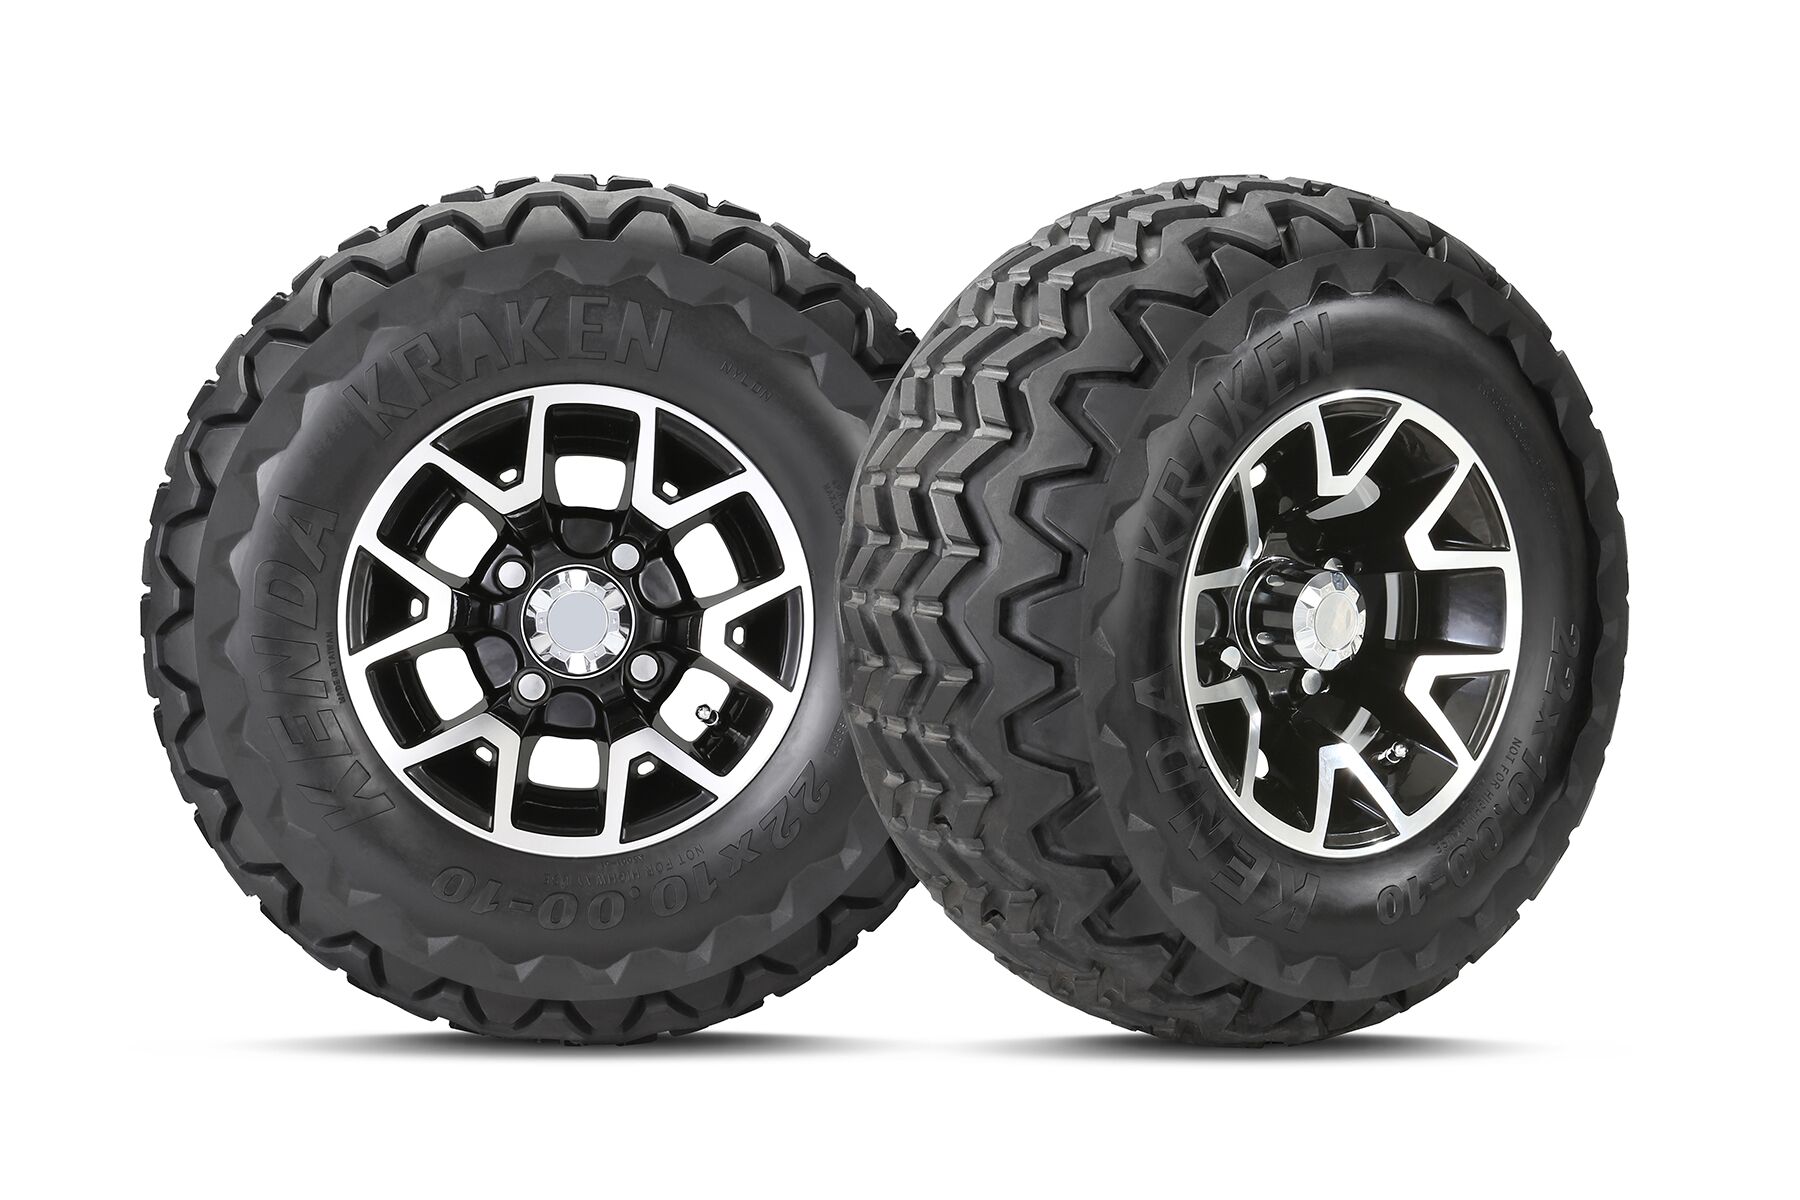 Club Car Introduces New Tires, Wheels and Lift Kit for Precedent® Golf Cars